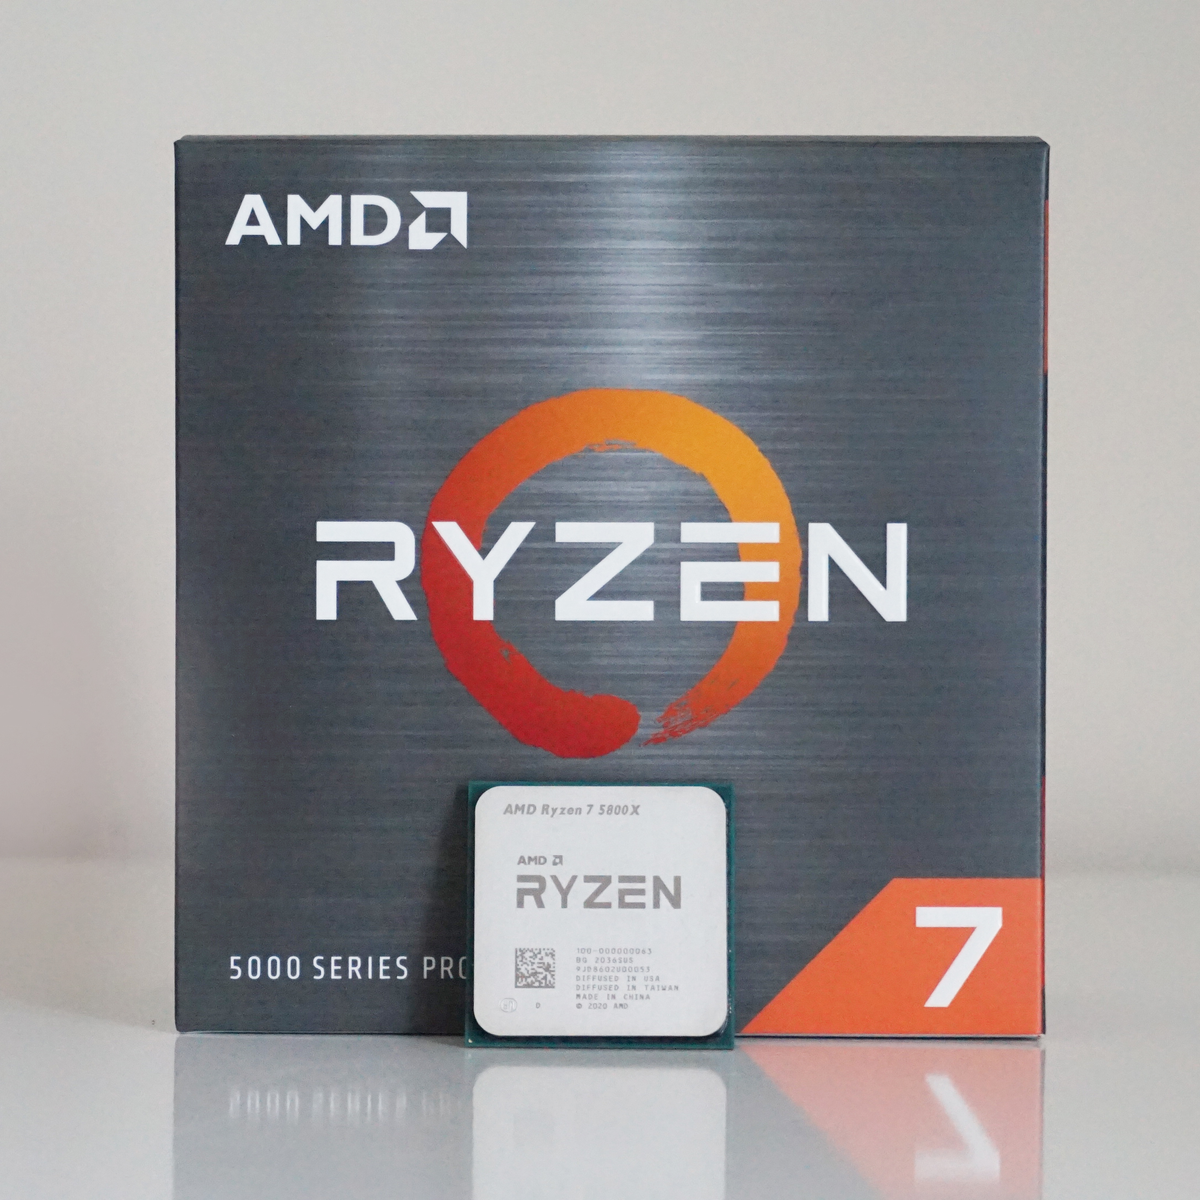 AMD's Ryzen 7 5800X is an even better value gaming CPU than the